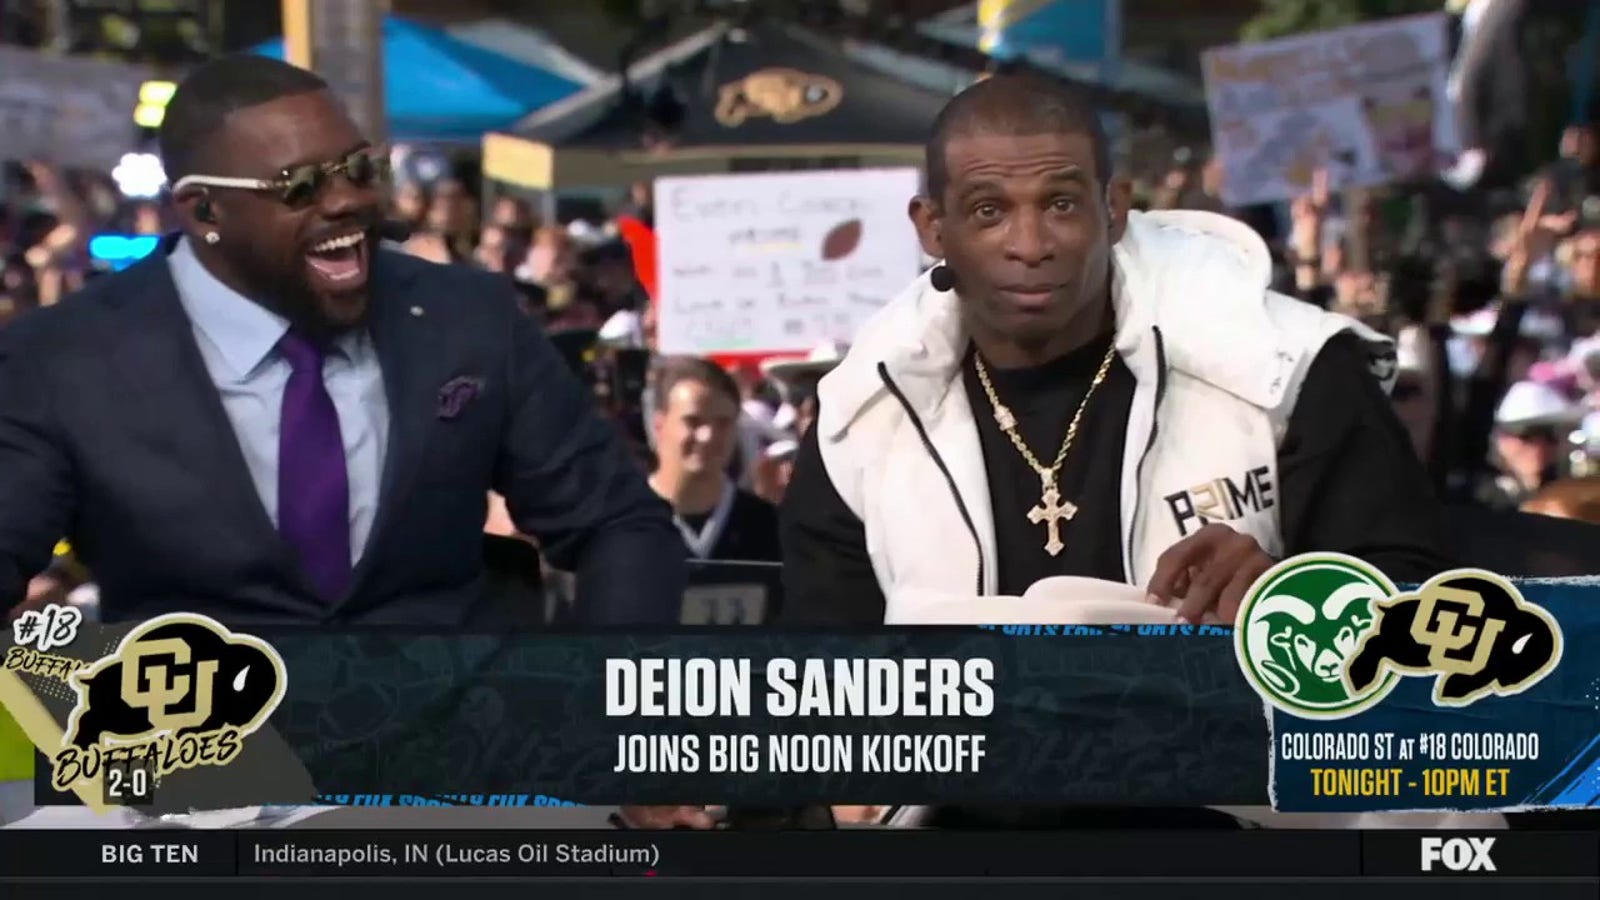 Deion Sanders discusses exceeding expectations, more!